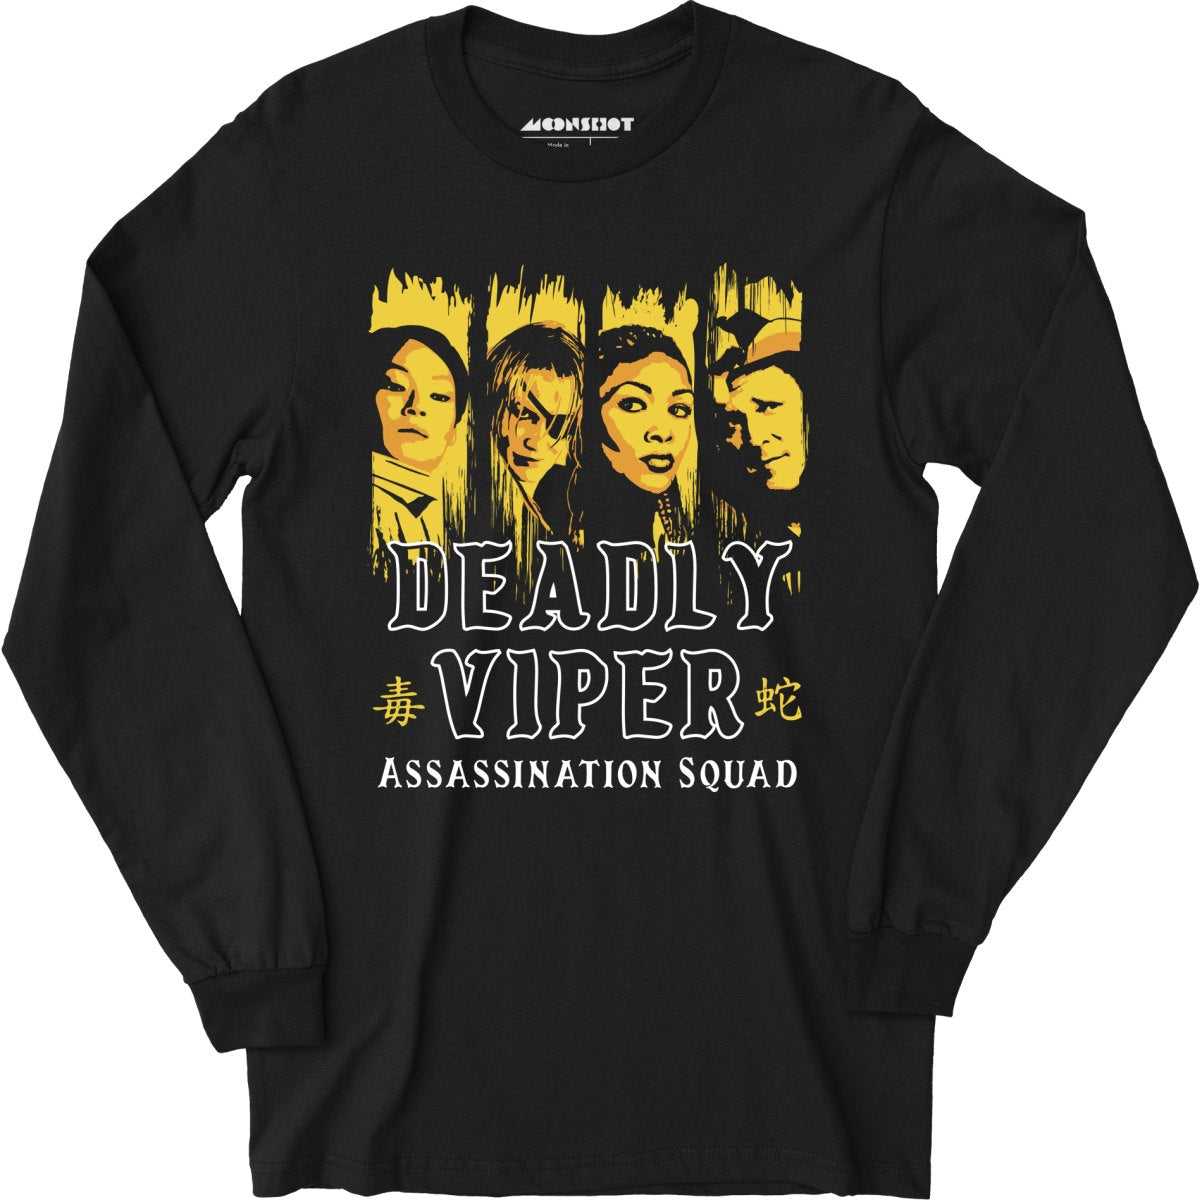 Deadly Viper Assassination Squad - Long Sleeve T-Shirt